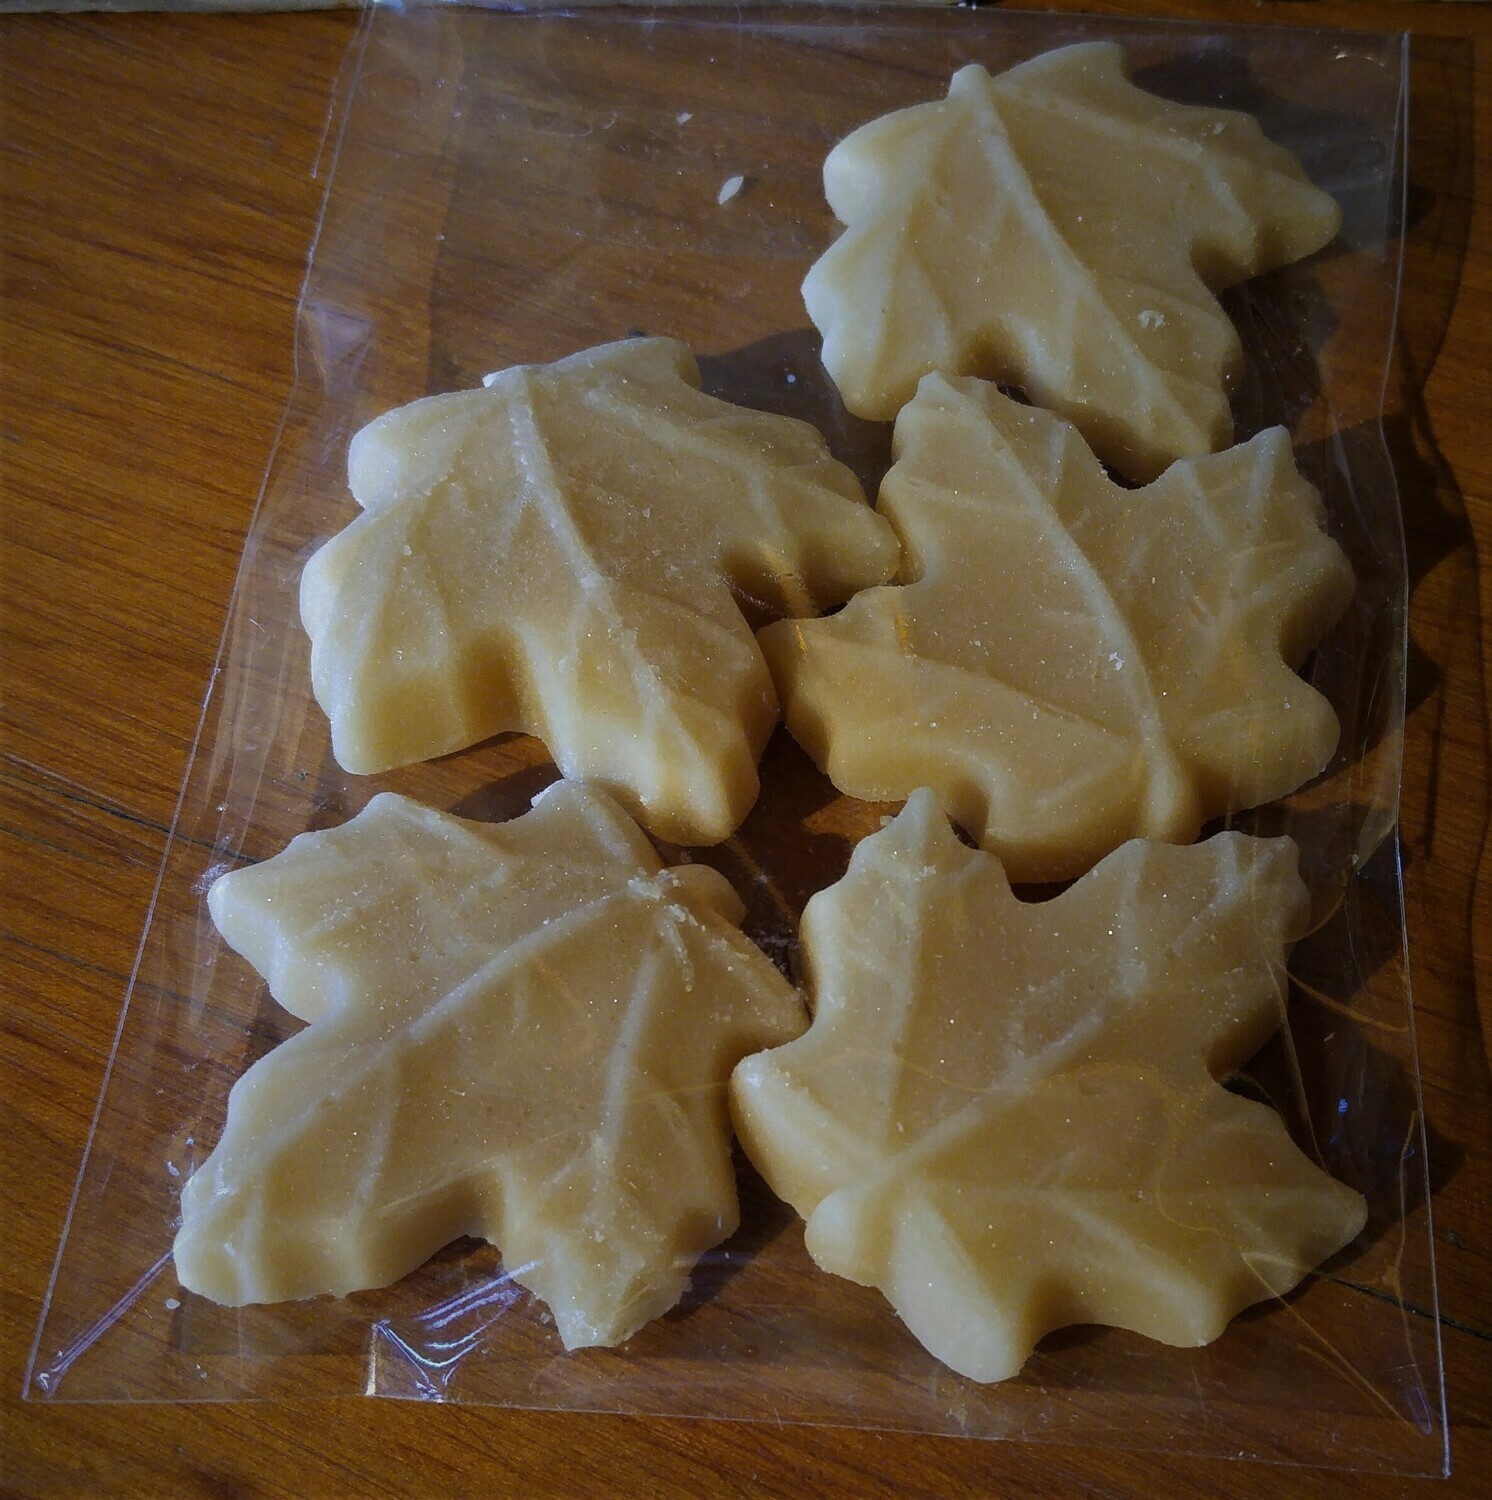 Package of 5 Large Pure Maple Sugar Candies - Available for pickup orders only - Not shipped